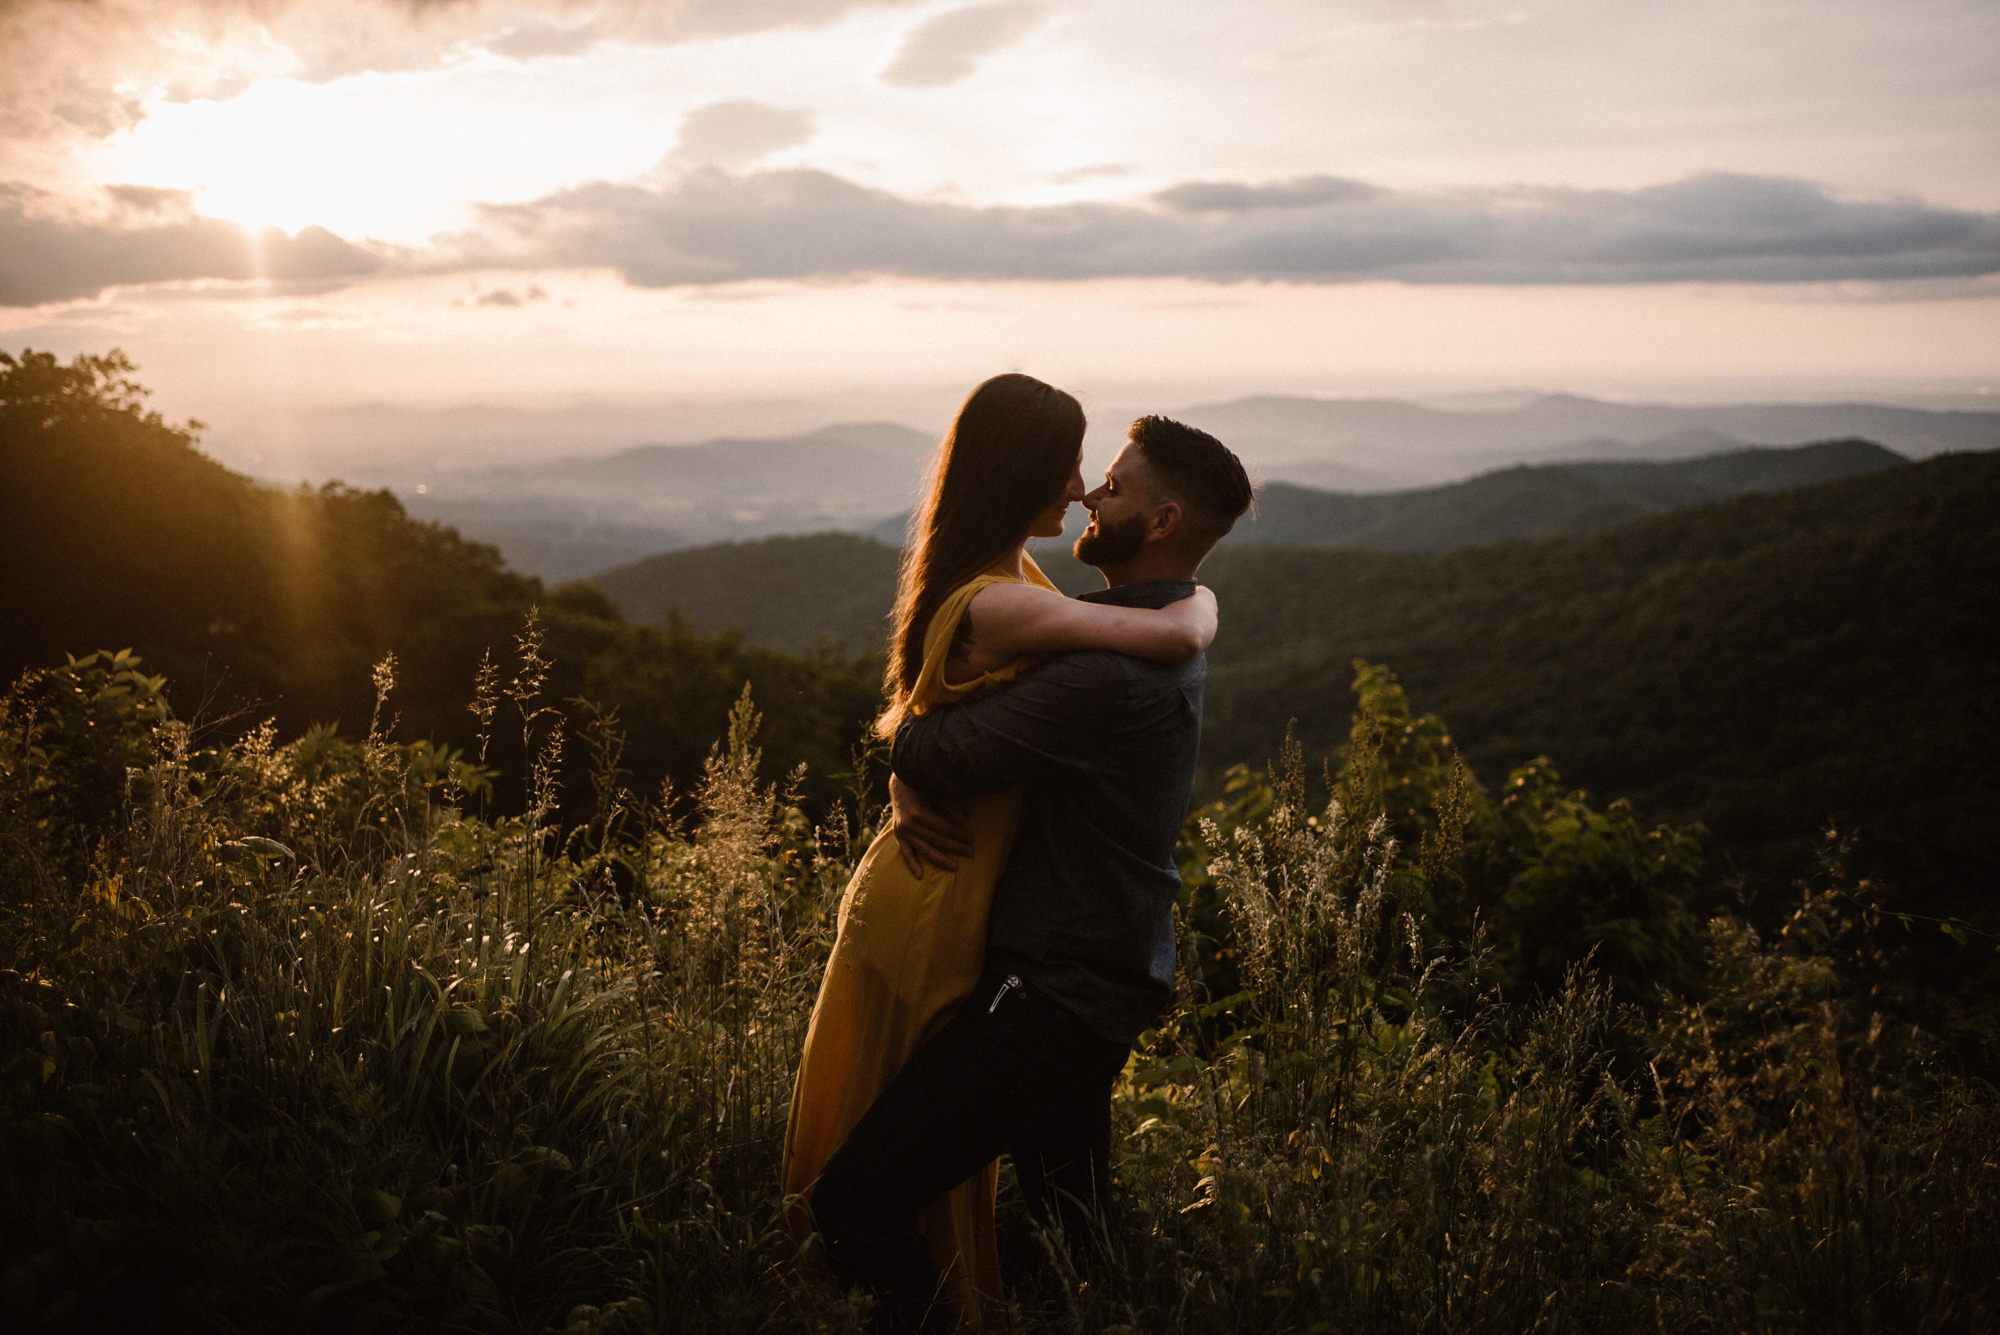 Camryn and Larry Sunrise Engagement Session in Shenandoah National Park - Things to Do in Luray Virginia - Adventurous Couple Photo Shoot White Sails Creative_14.jpg